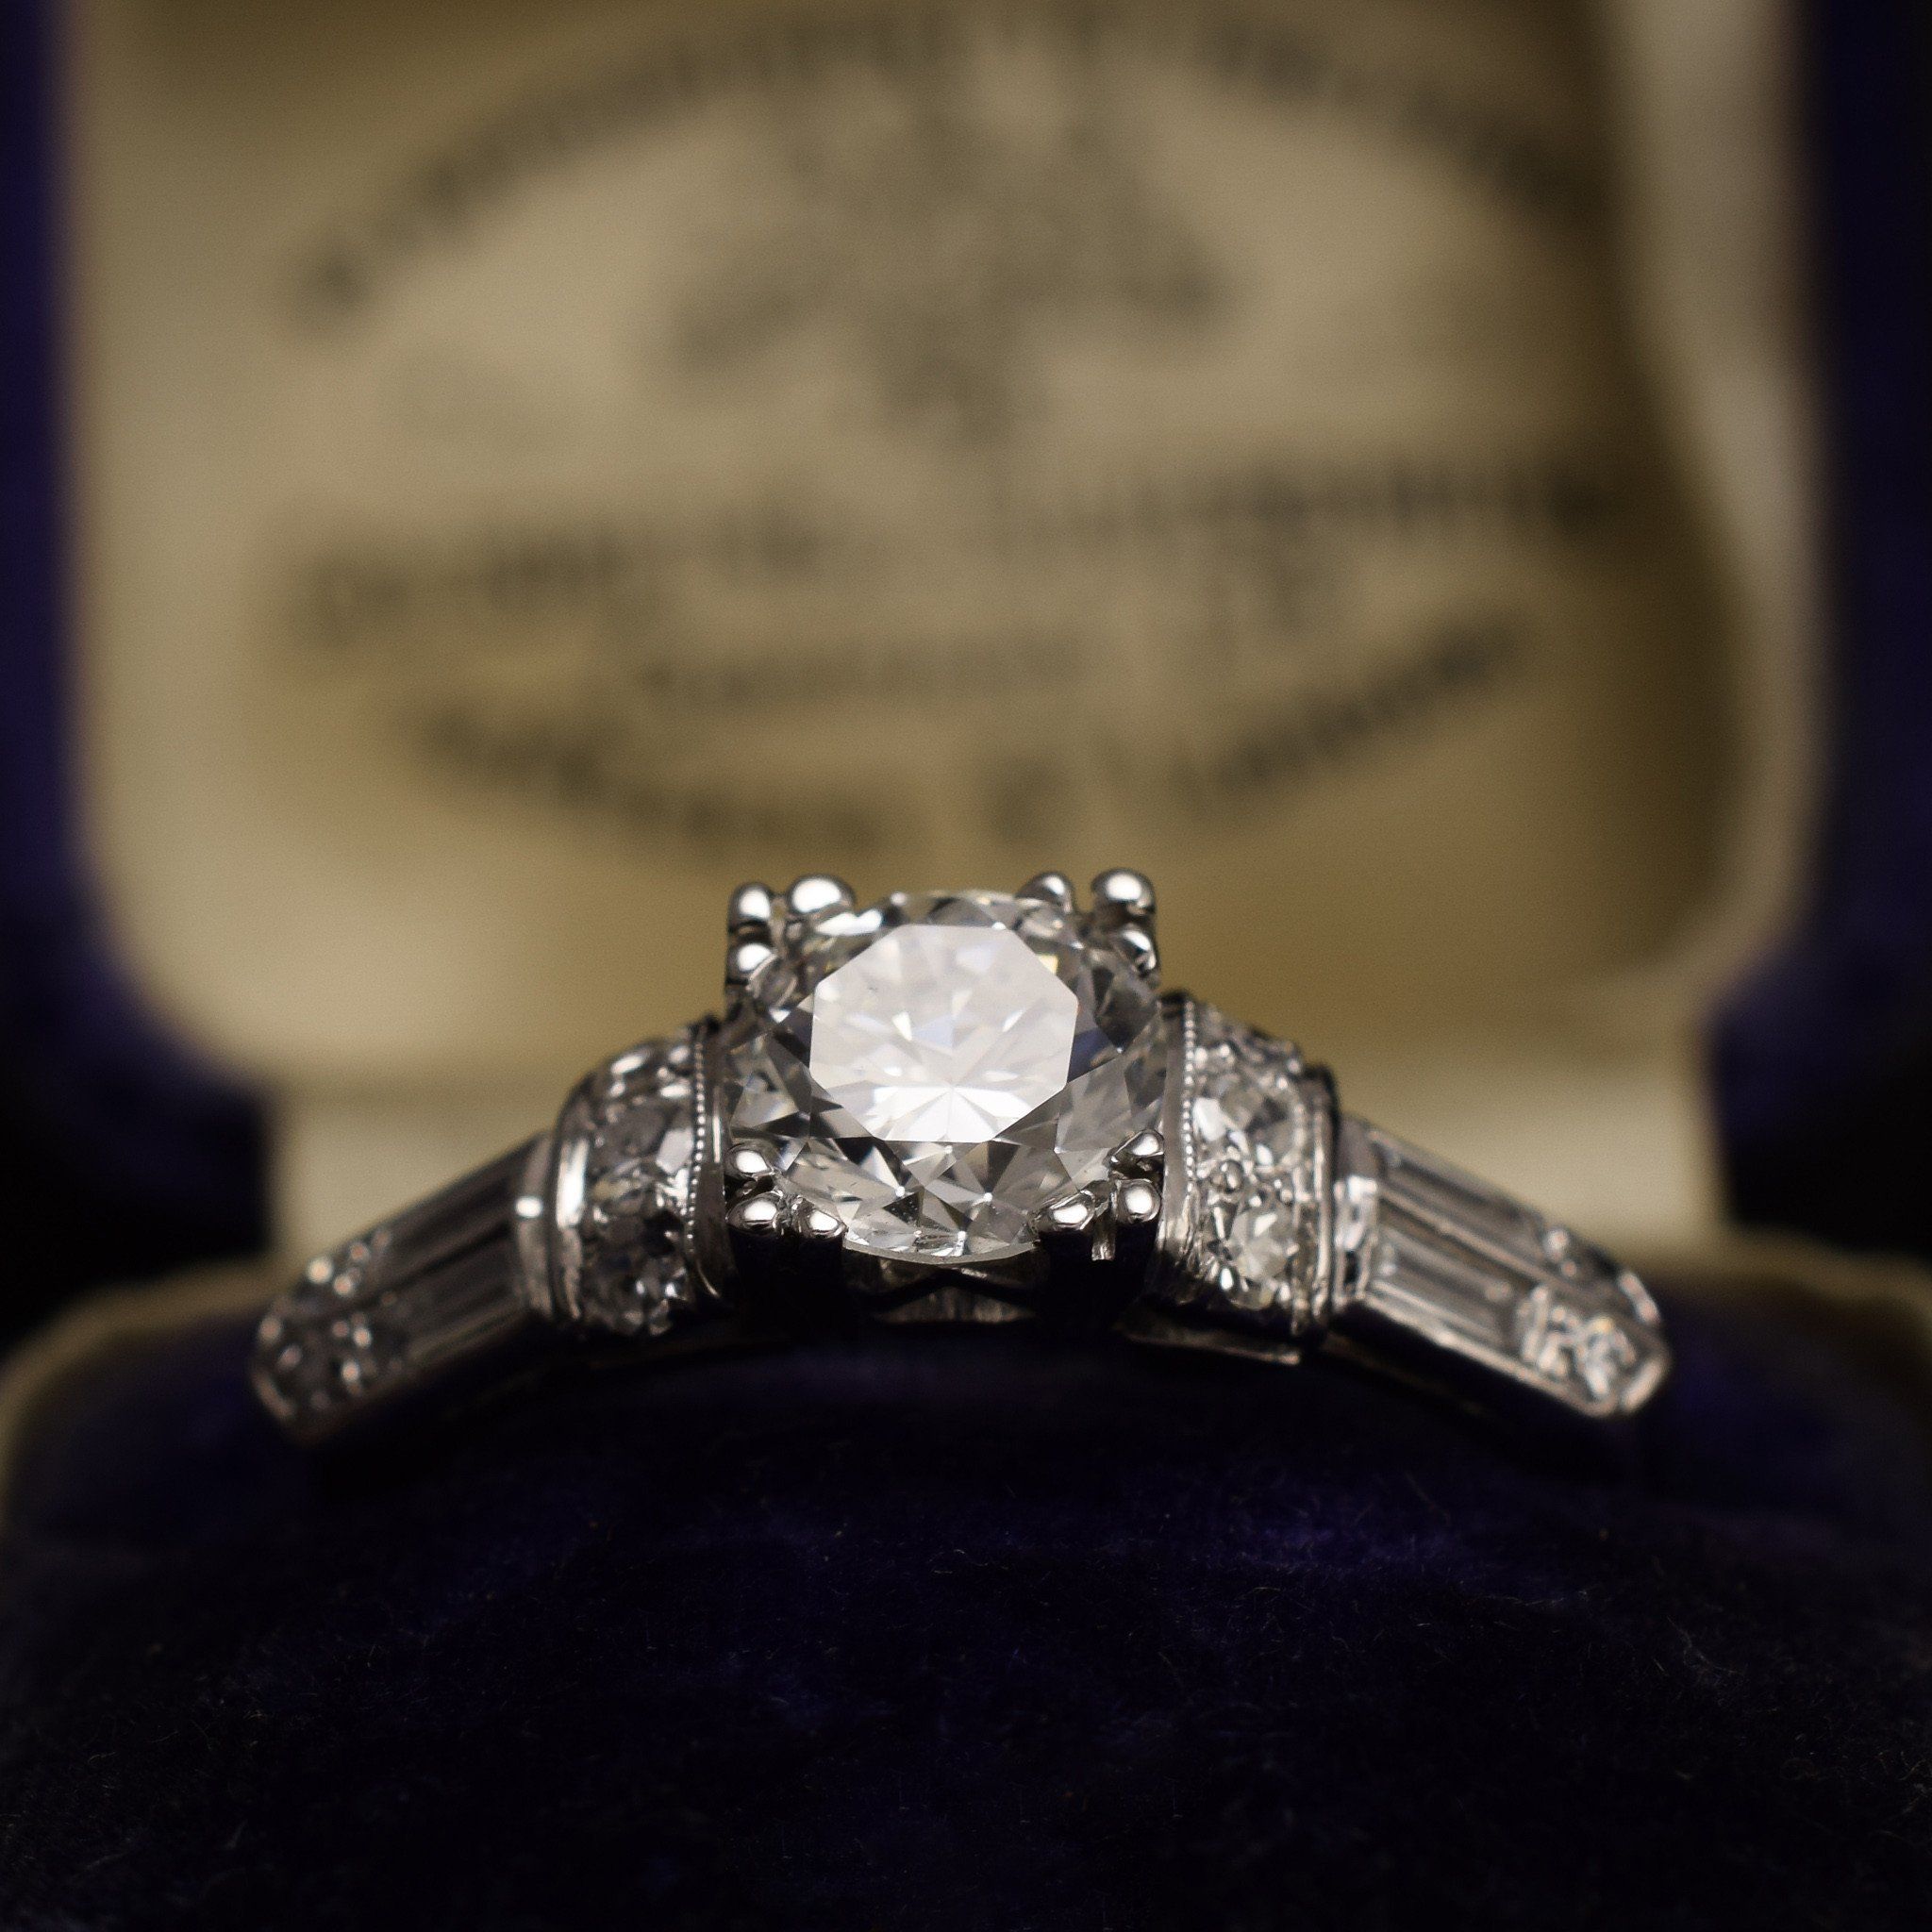 1940s 1.5ctw Diamond Engagement Ring with Gradient Shoulders